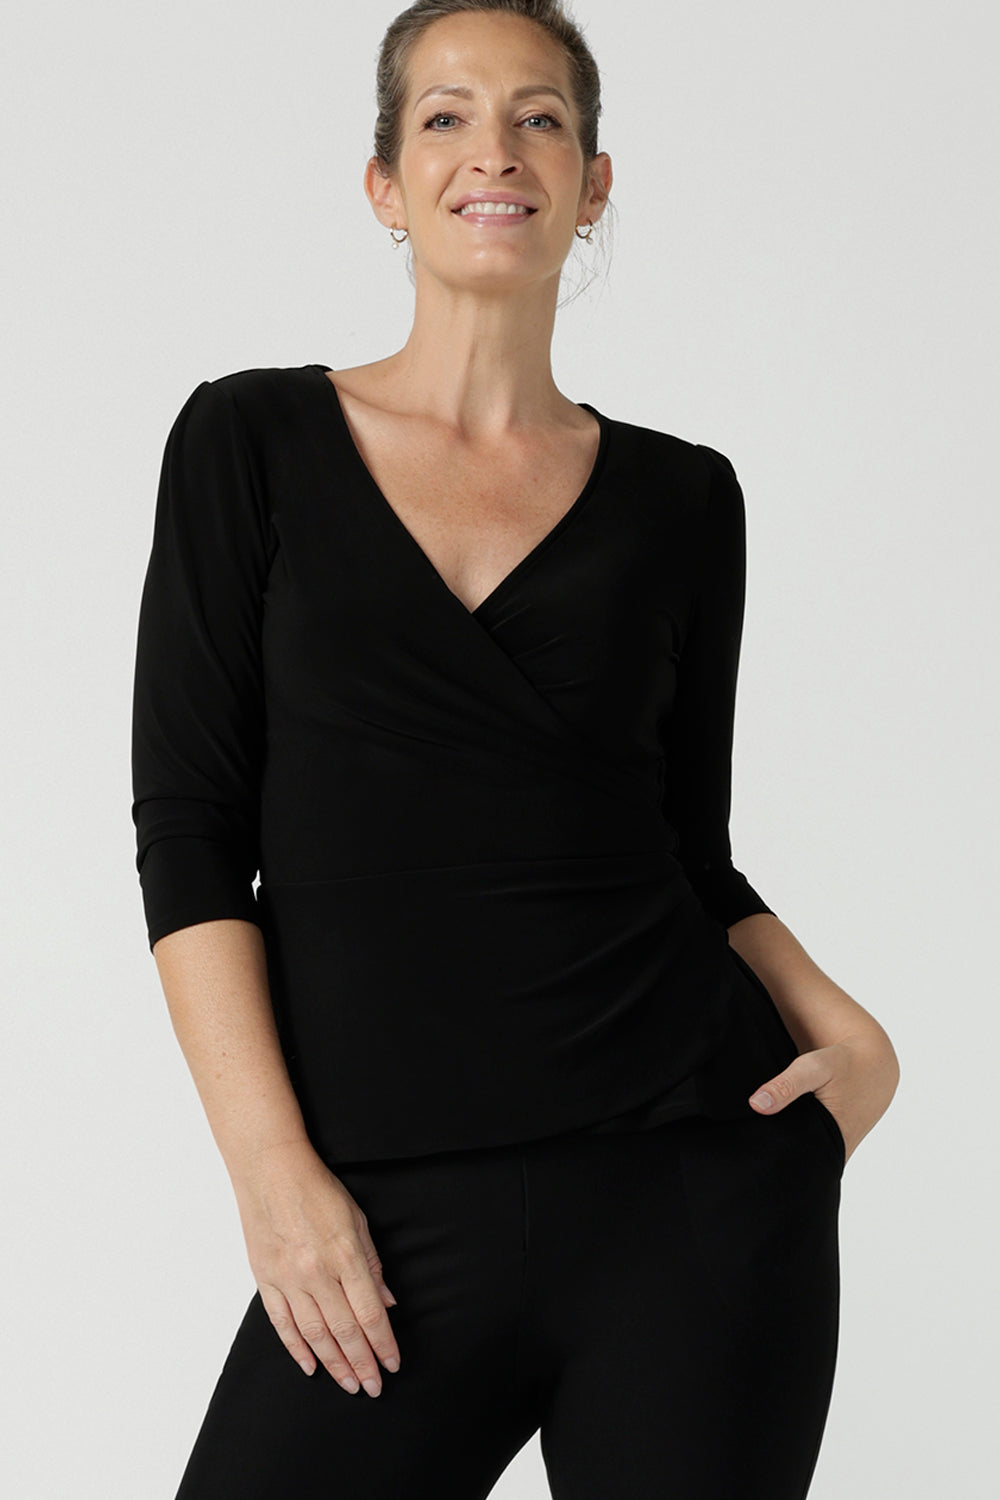 Size 10 woman wears the Kyle top in Black soft jersey. A soft wrap top made in Australia for women size 8 - 24. The perfect work to weekend top in comfortable and easy care jersey. Made in Australia for women size 8 - 24. 